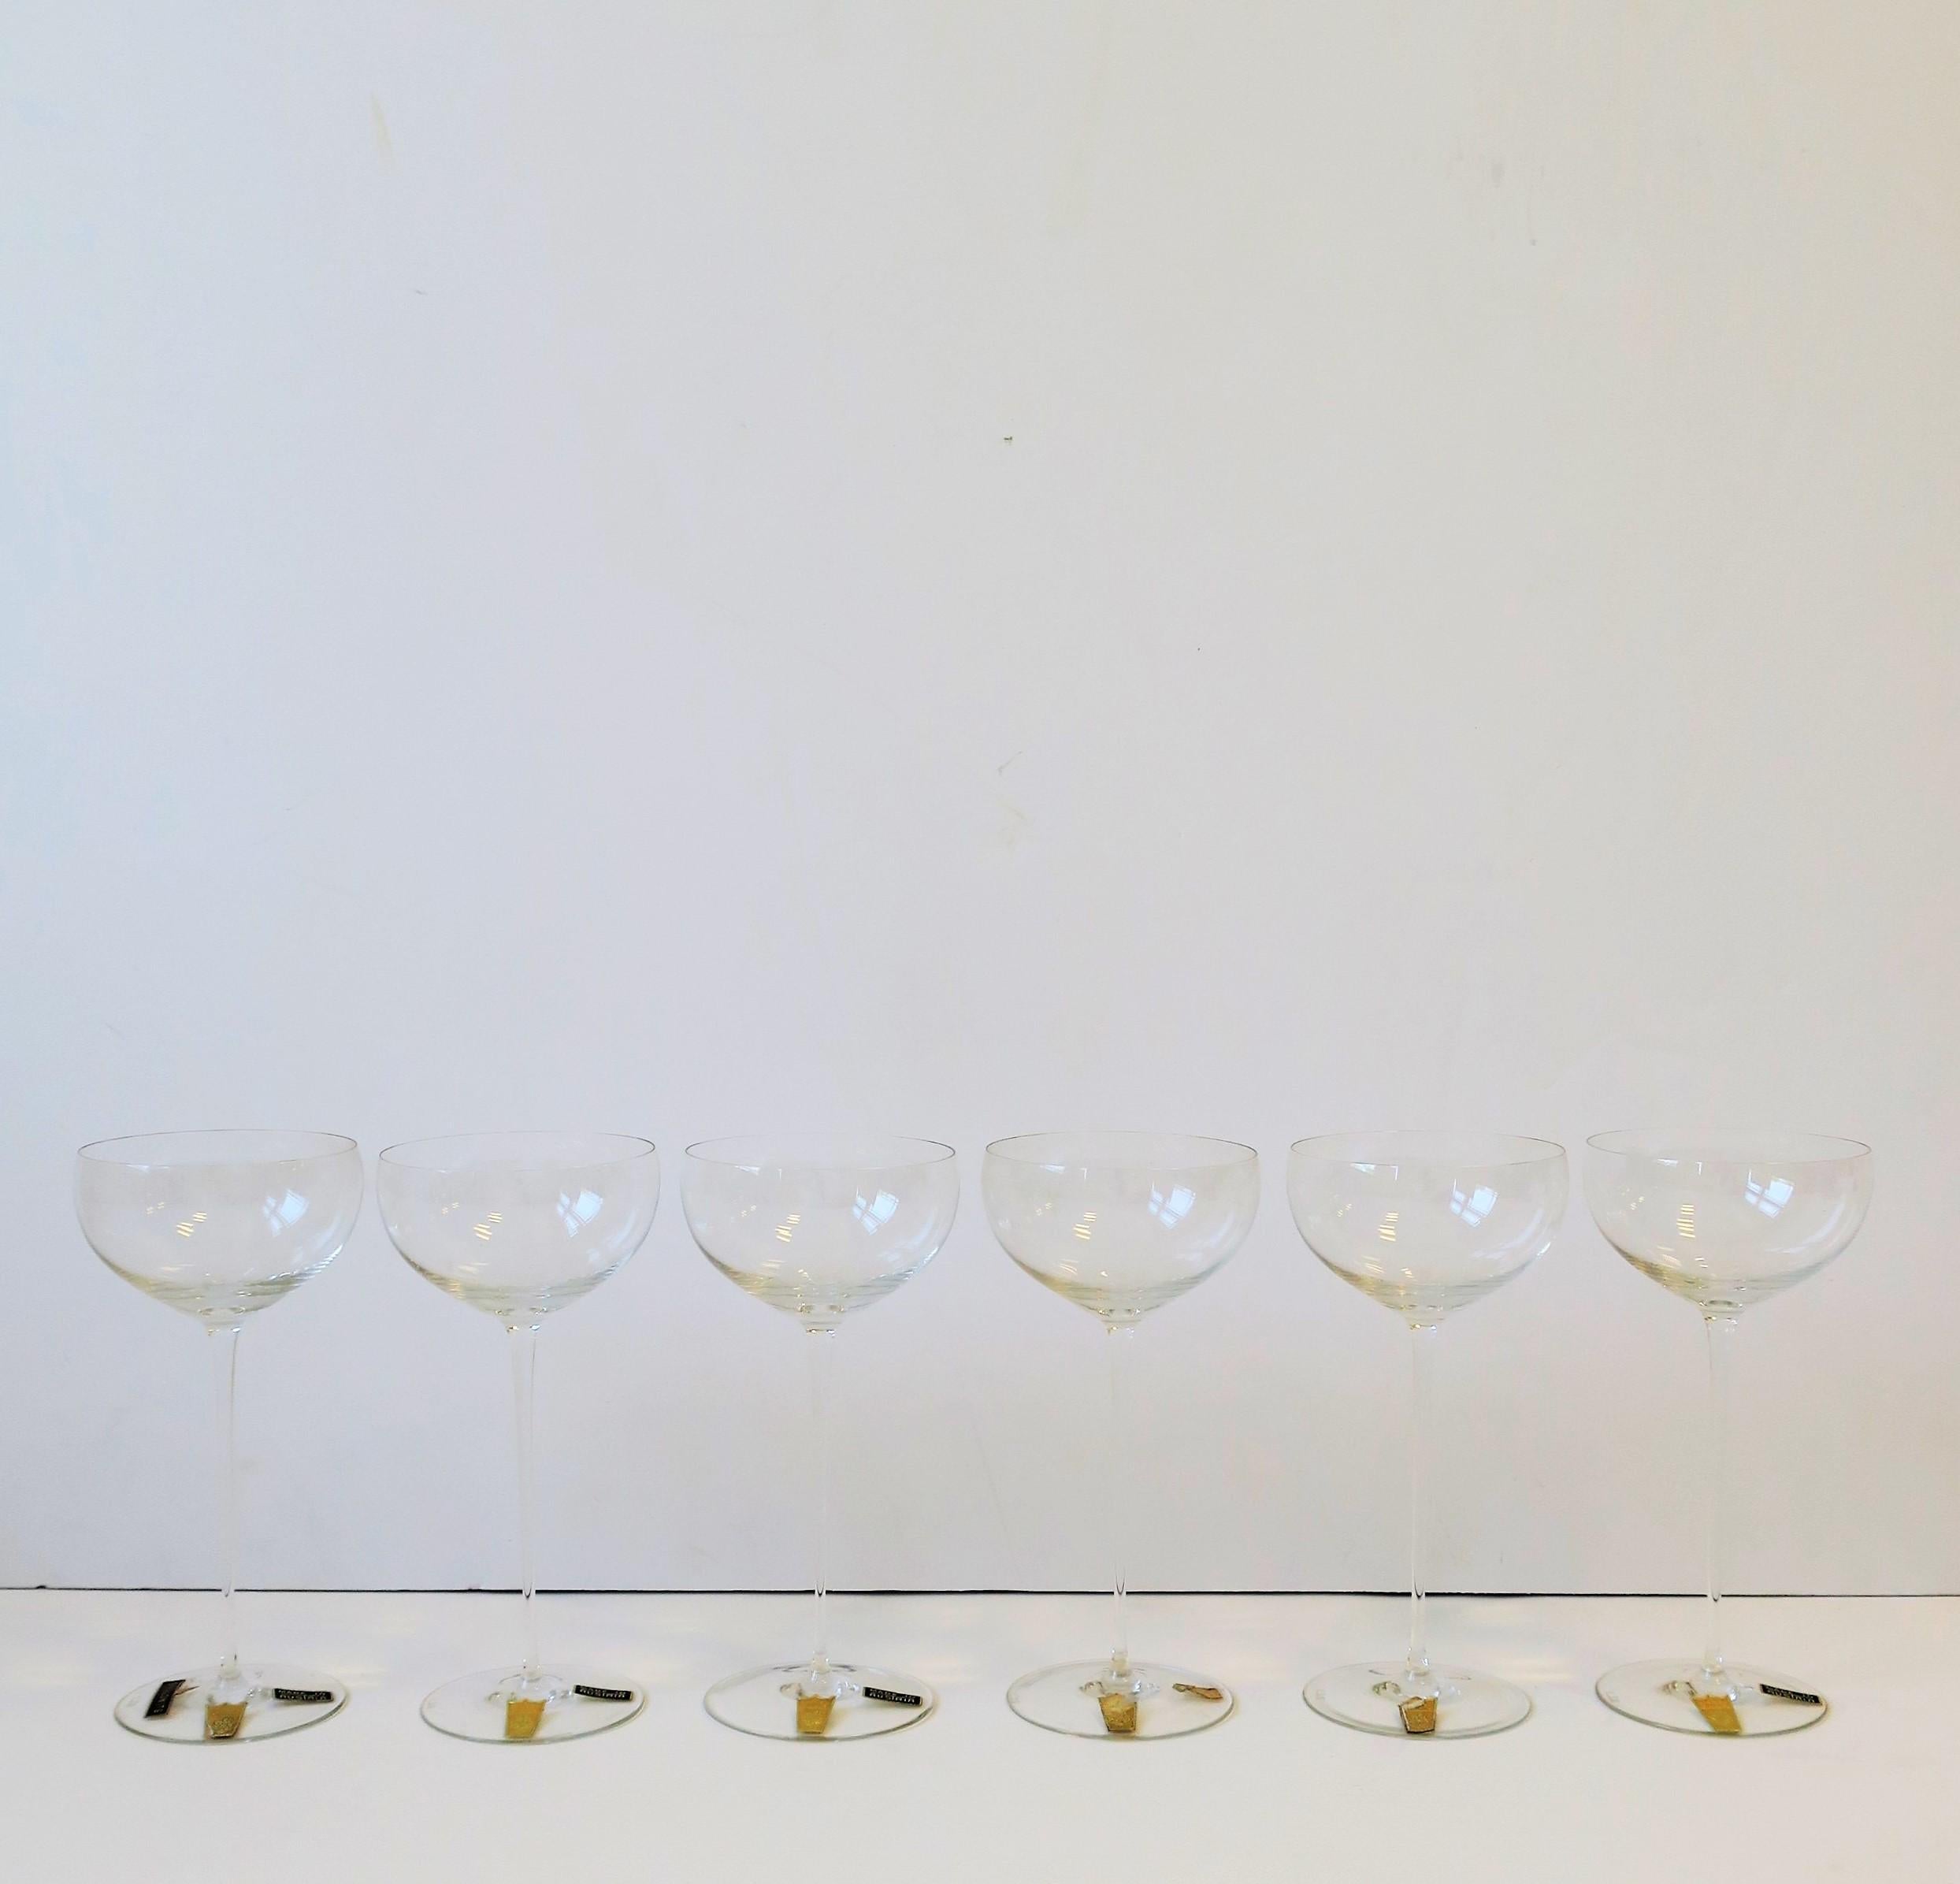 A very beautiful and rare set of 6 Austrian fine crystal Champagne or wine glasses by Claus Josef Riedel, circa early 20th century, Austria. Set appears to have never been used retaining original maker's mark labels (see image #3 and 4.) Designer's